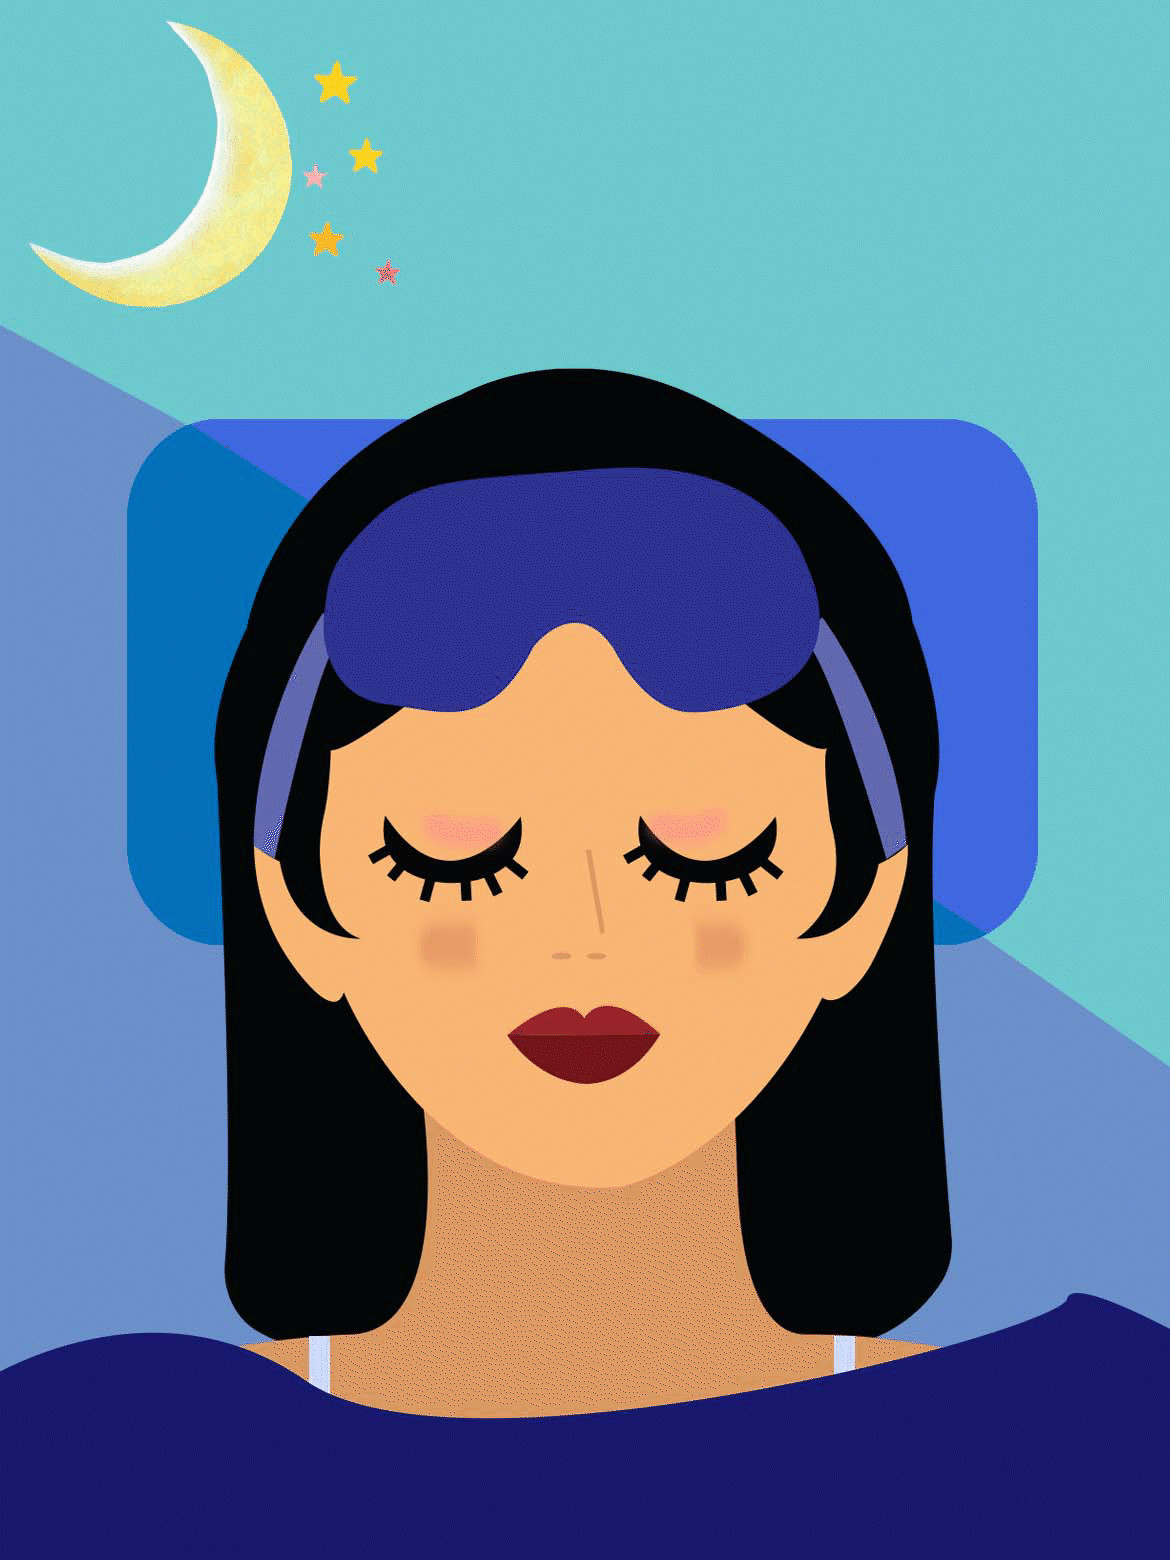 5 Reasons Why Sleeping In Makeup Is A Bad Idea For The Skin